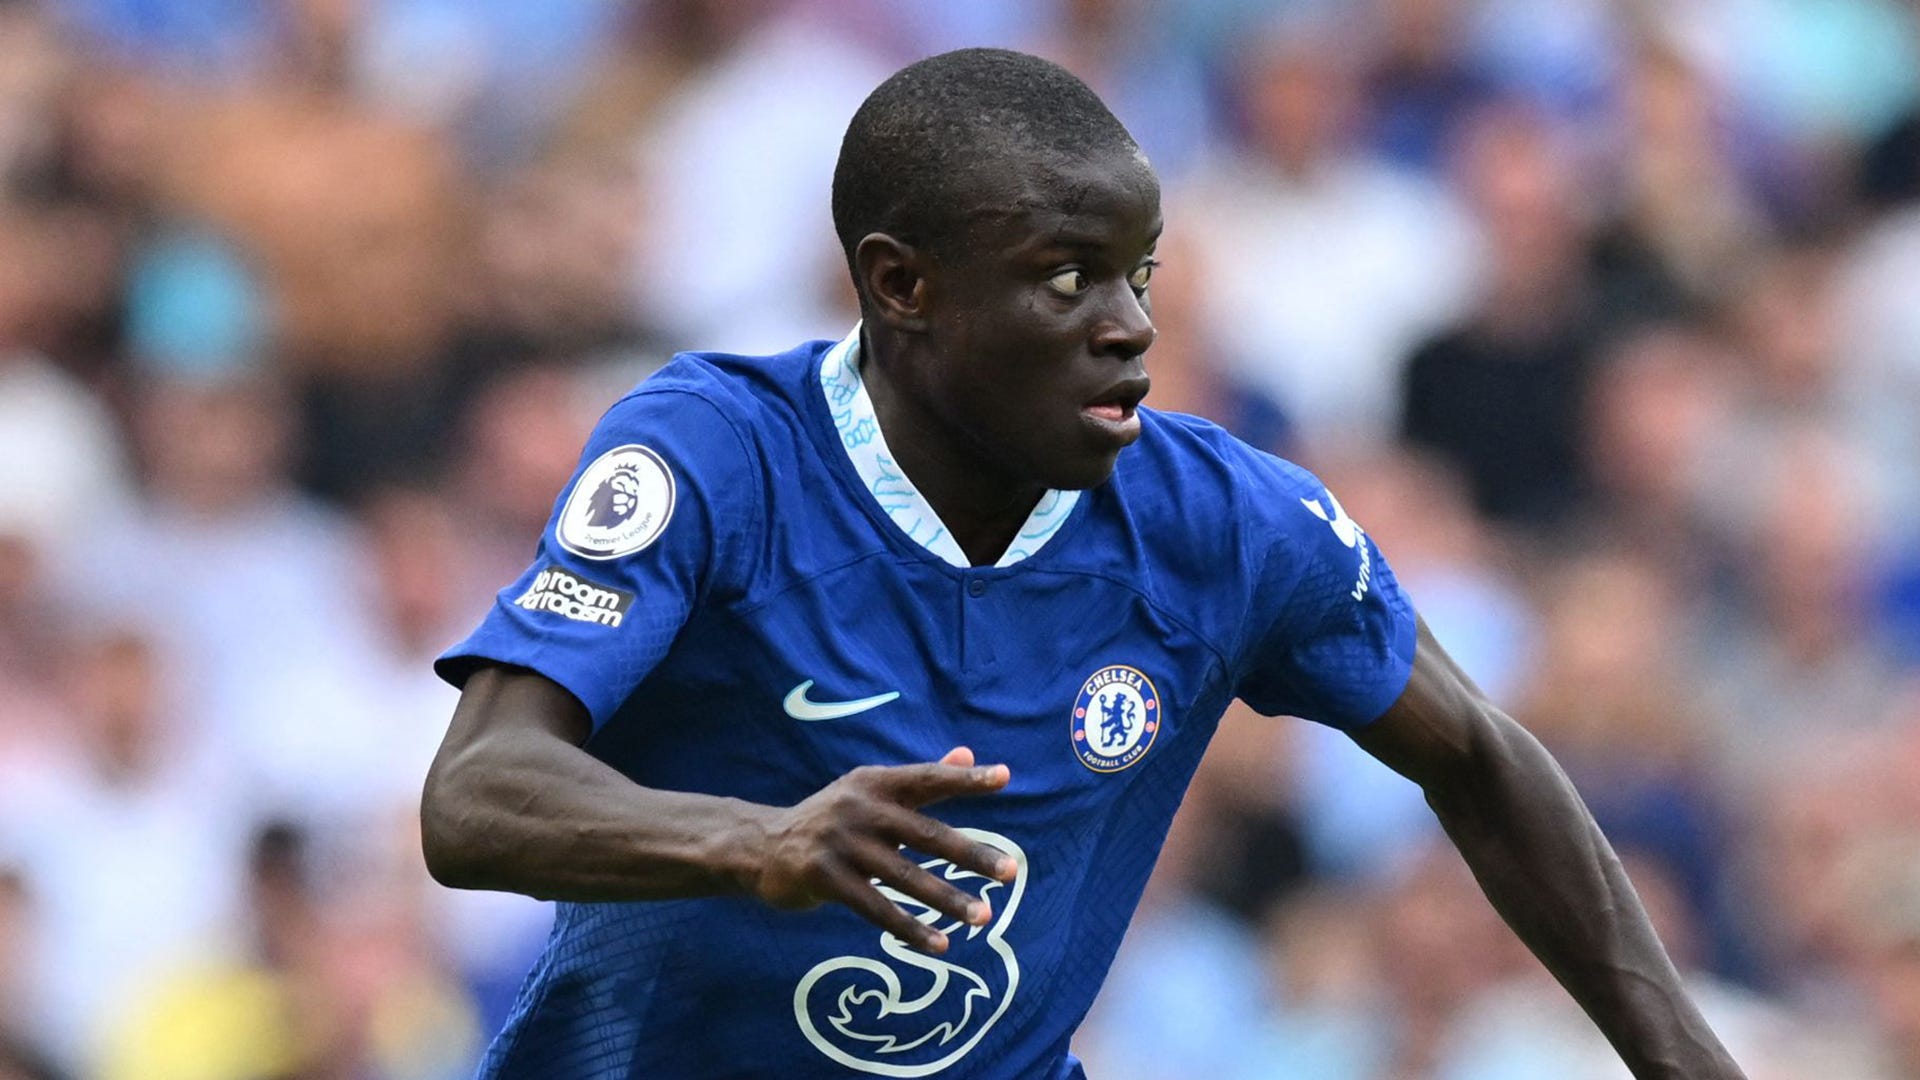 Not good news' - Chelsea midfielder Kante reportedly to miss World Cup after injury setback | Goal.com UK